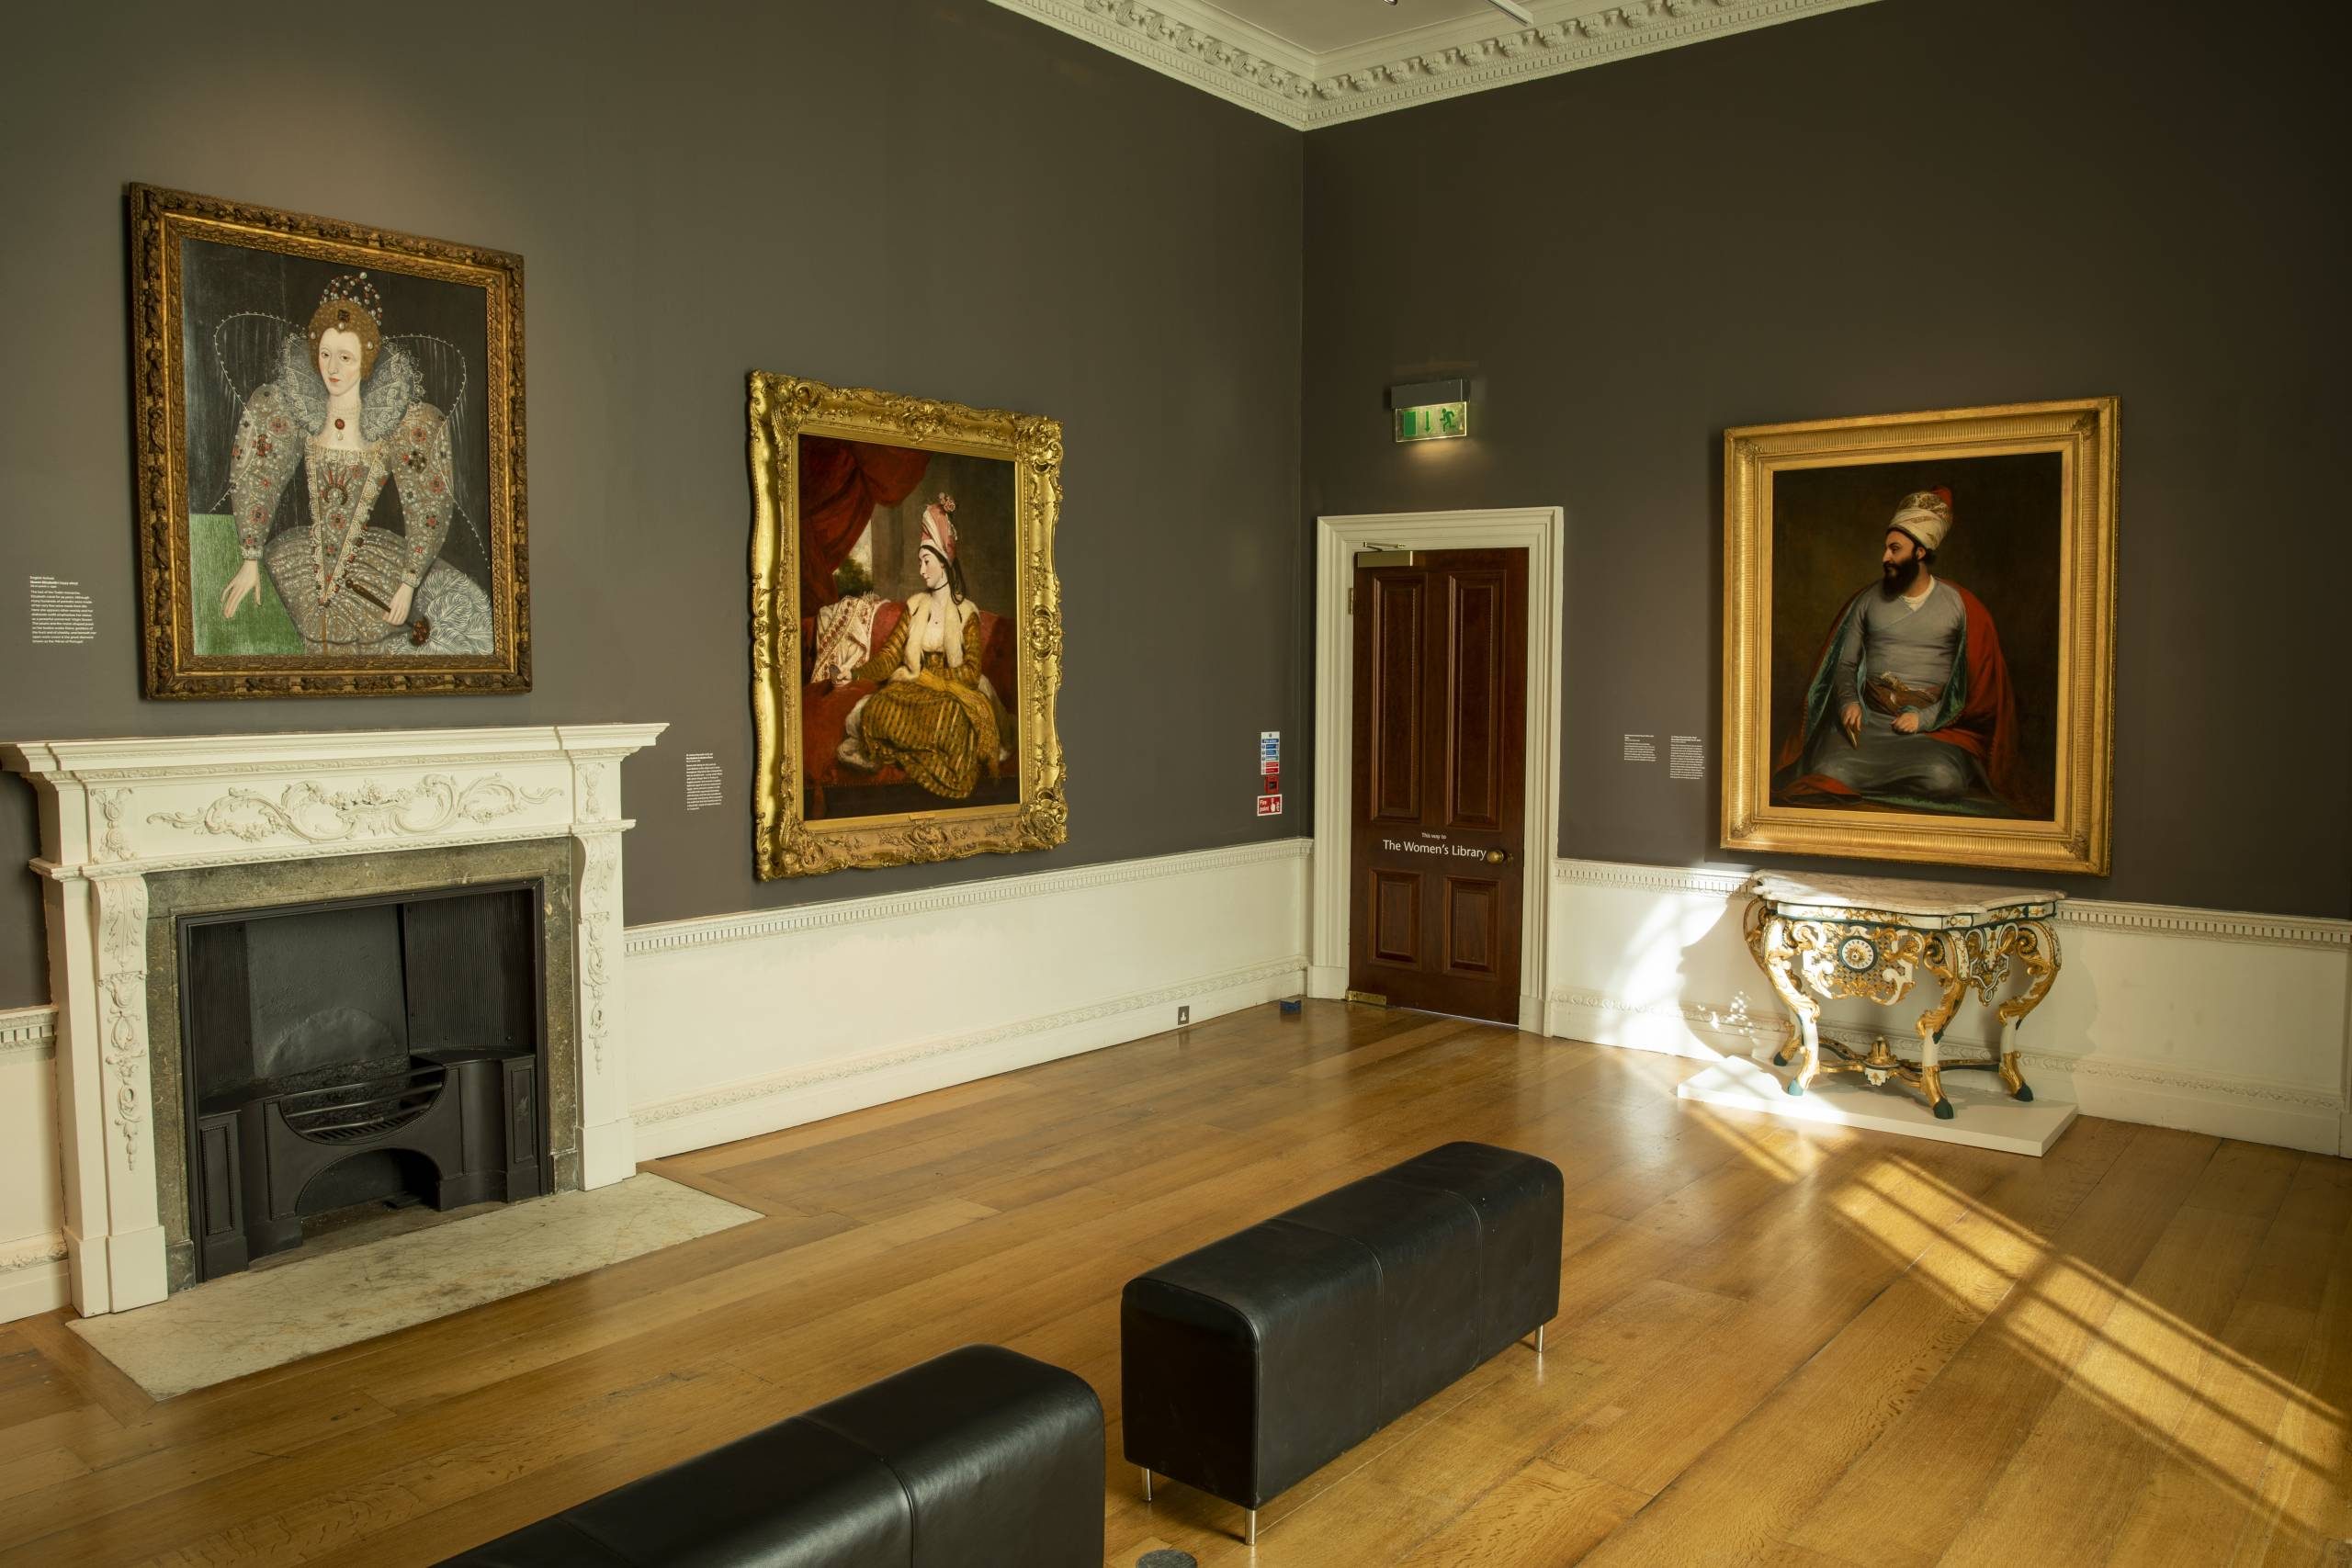 This image depicts an art gallery displaying various artistic works from different eras and cultures. The room features ornate wooden panelling, a decorative fireplace, and large framed paintings hung on the walls, some in gilded frames. One painting shows a regal figure, likely a monarch or nobility, in an elaborate dress and ruff collar. Another portrays an individual in traditional Middle Eastern attire and a turban. In the center of the room is a carved wooden bench or seating area, as well as an ornamental sculptural piece, possibly an antique table or stand with intricate designs. There is also a modern exit sign and a door leading to another part of the gallery.